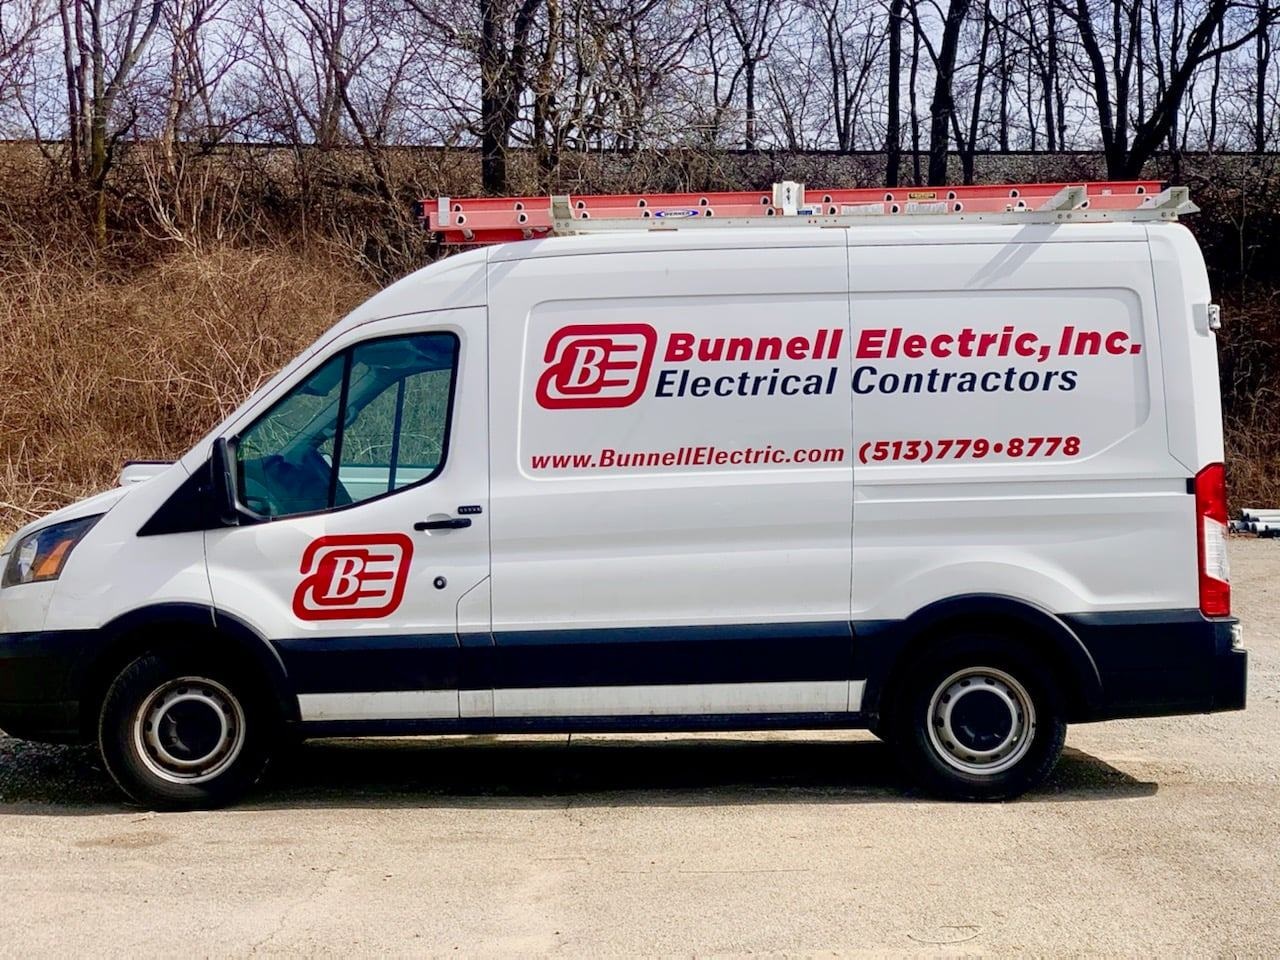 Bunnell Electric